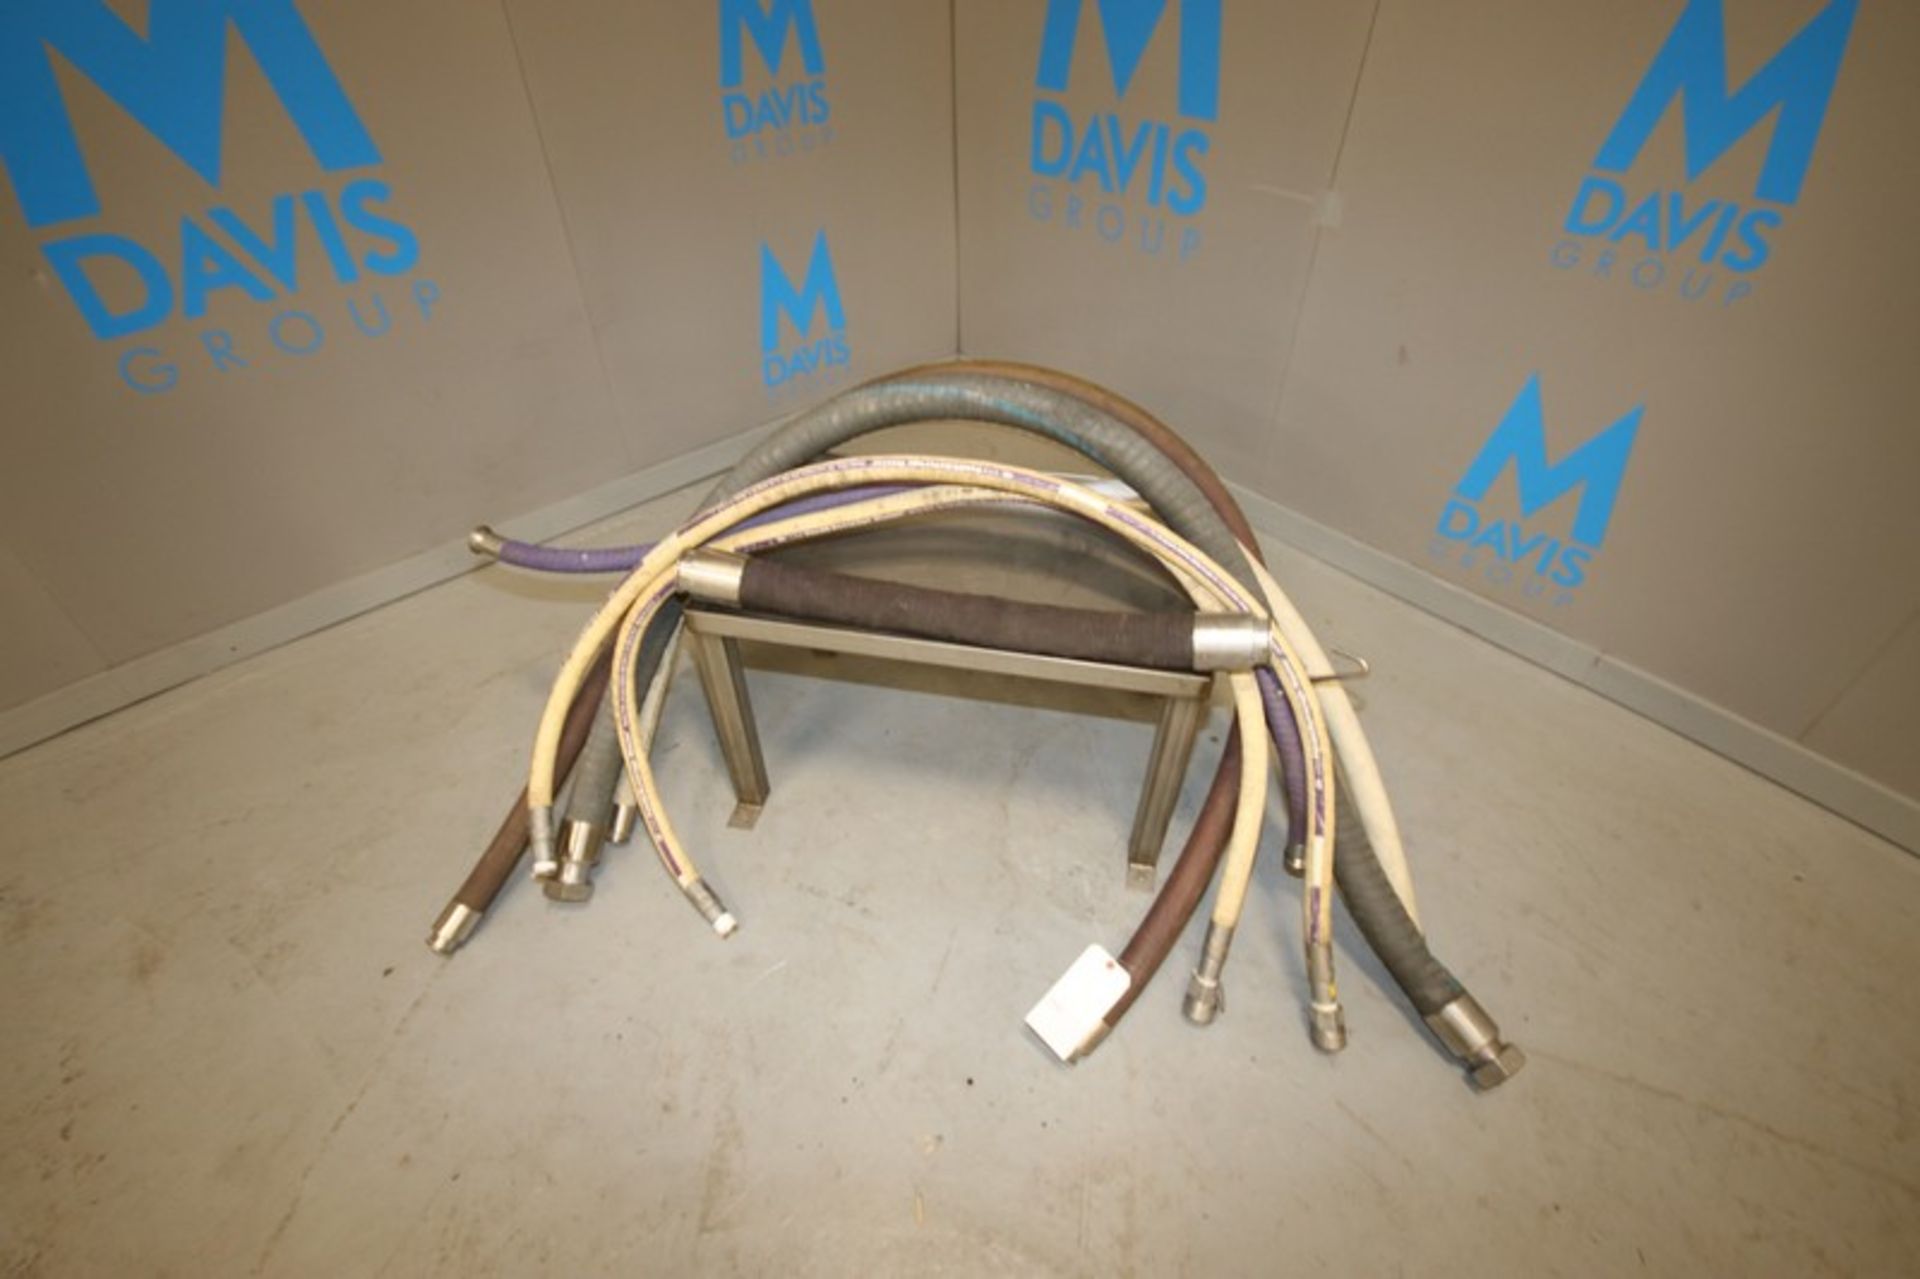 Assorted Transfer Hoses, Length Ranging FromAprox. 35" L - 125" L, Clamp Type, Insert Type, and - Image 7 of 7